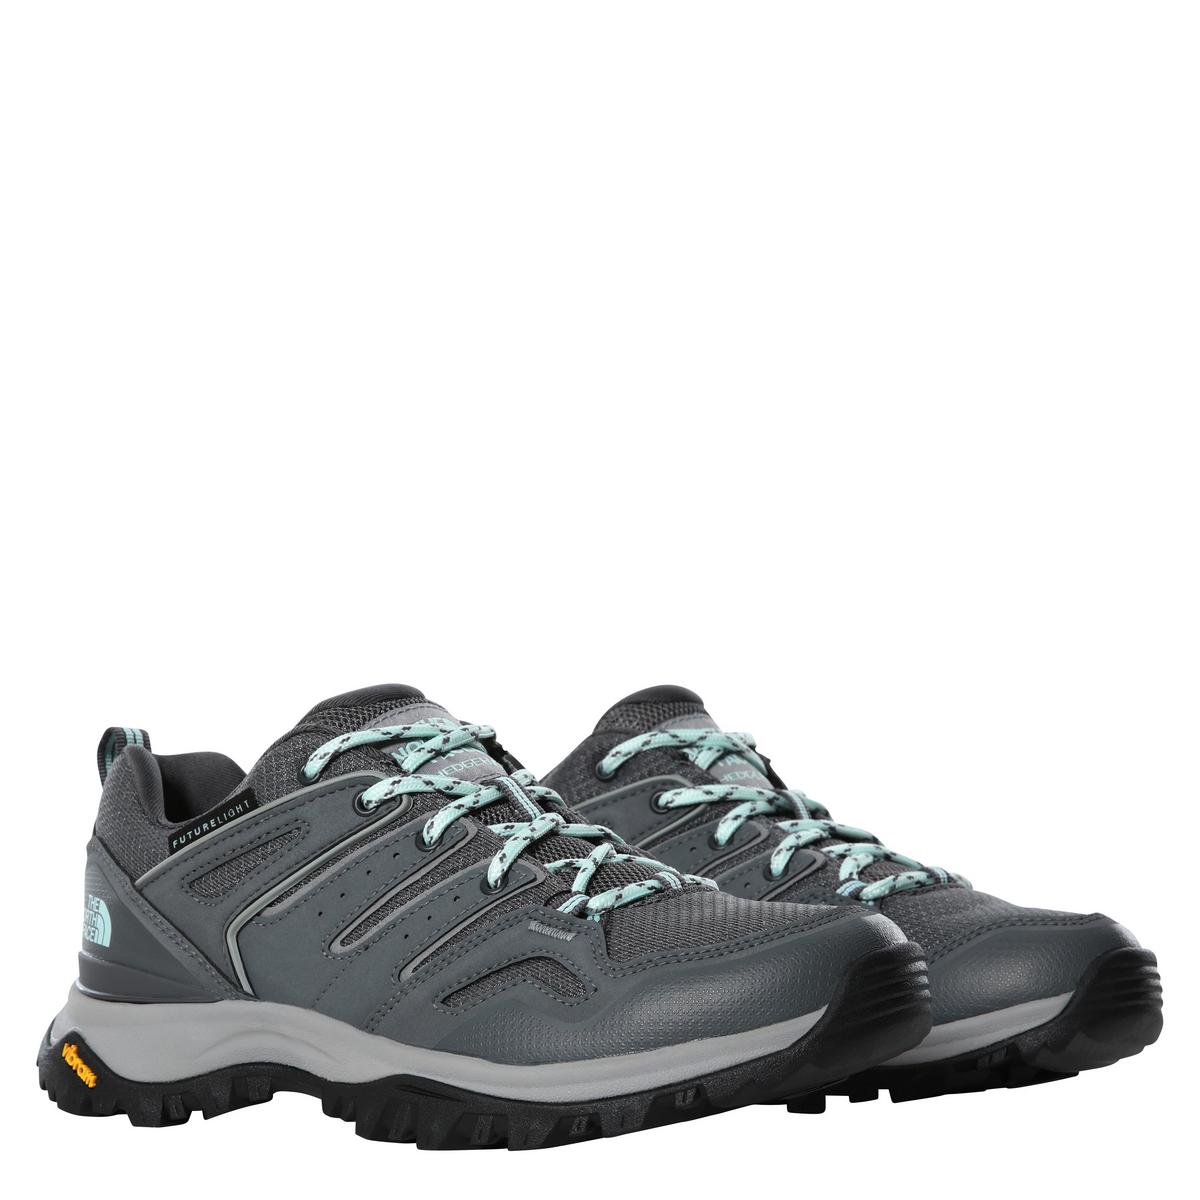 The North Face Women's Hedgehog Futurelight Shoes - Grey